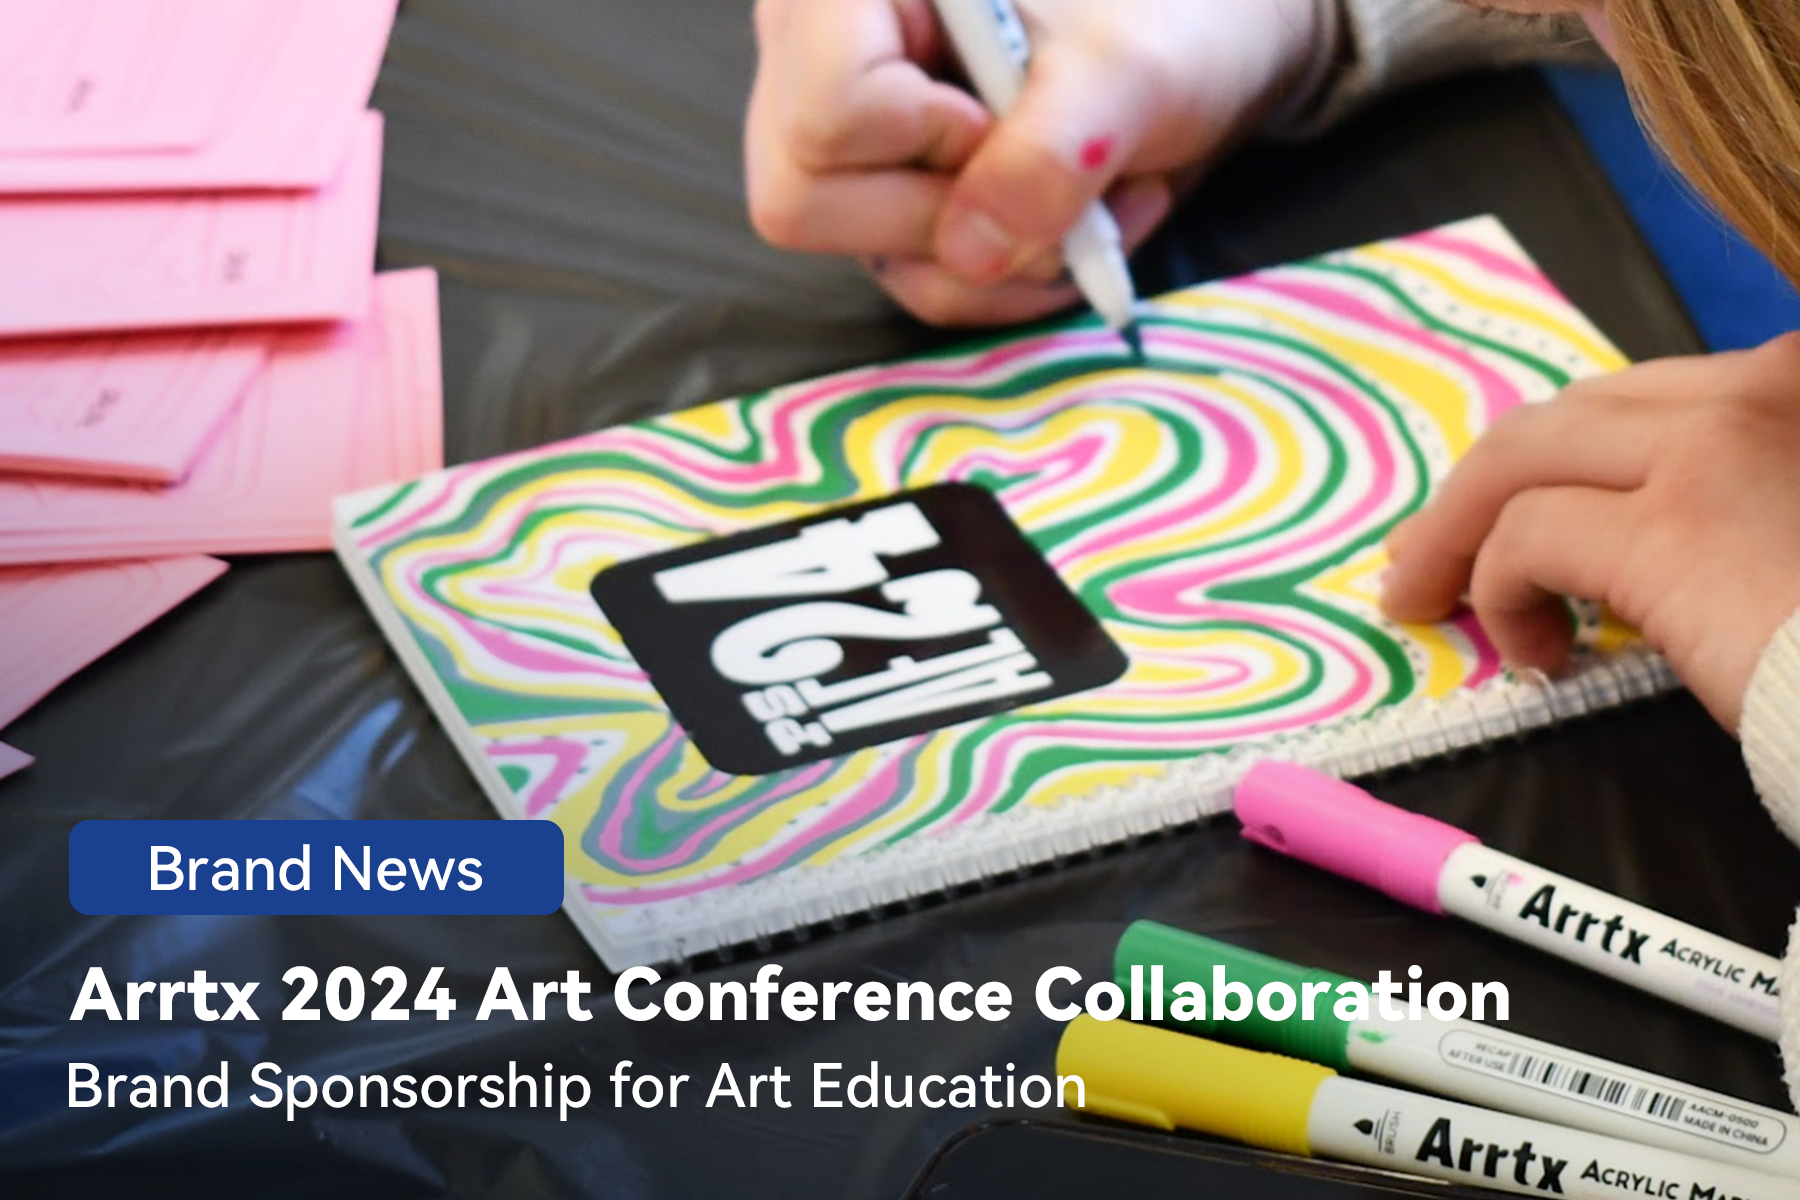 Arrtx Partners with American University to Support Art Education Programs